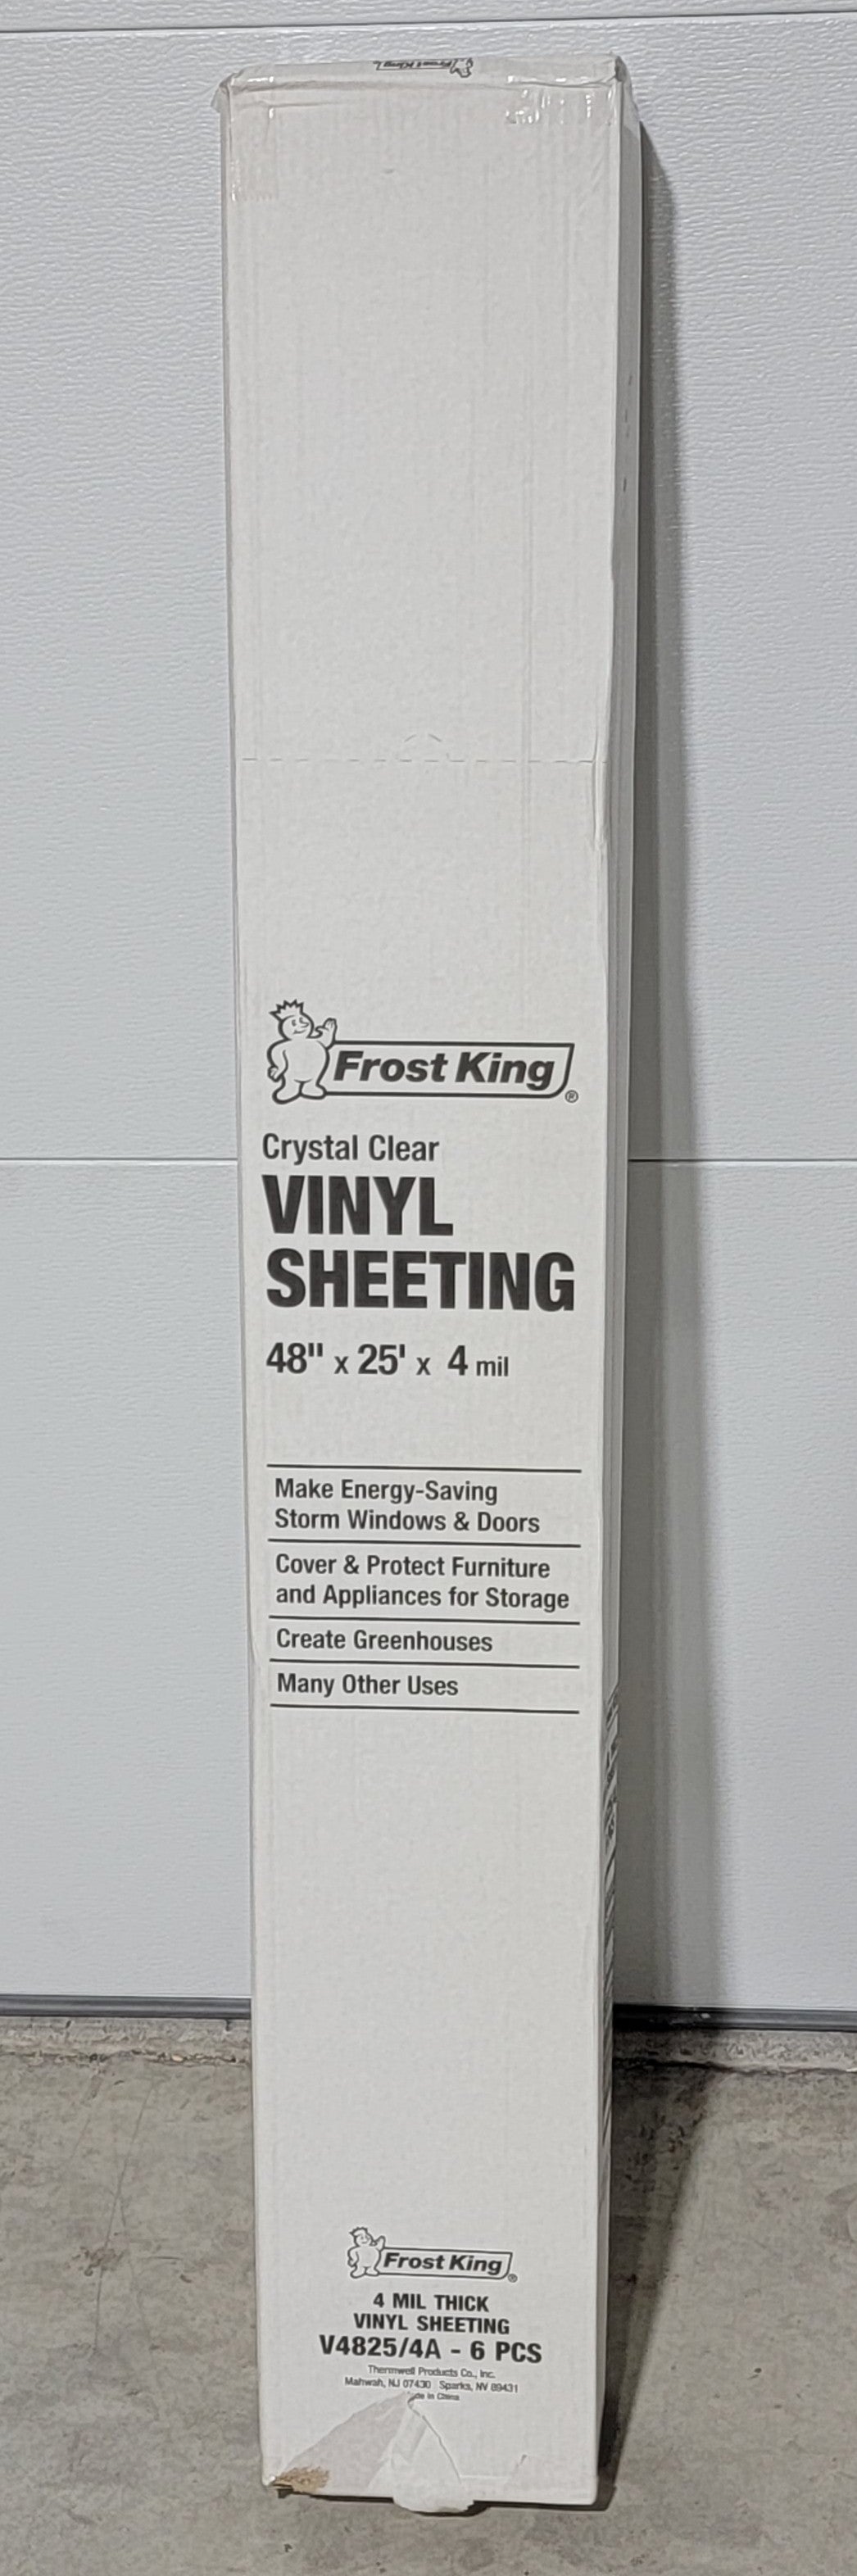 Frost King Lot of 6 Vinyl Sheeting Roll 48